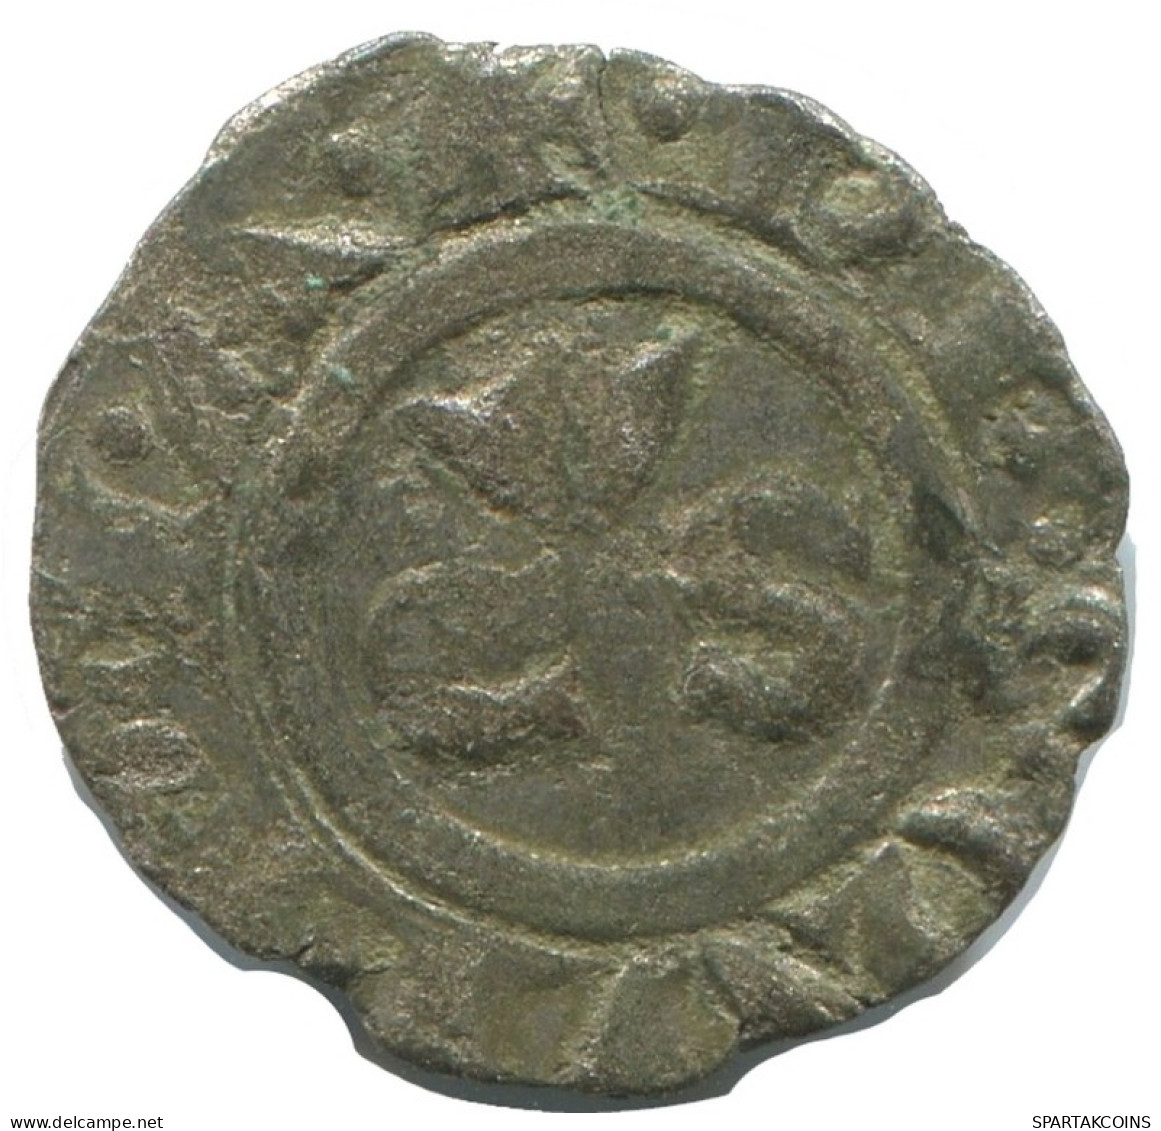 CRUSADER CROSS Authentic Original MEDIEVAL EUROPEAN Coin 0.8g/18mm #AC246.8.U.A - Other - Europe